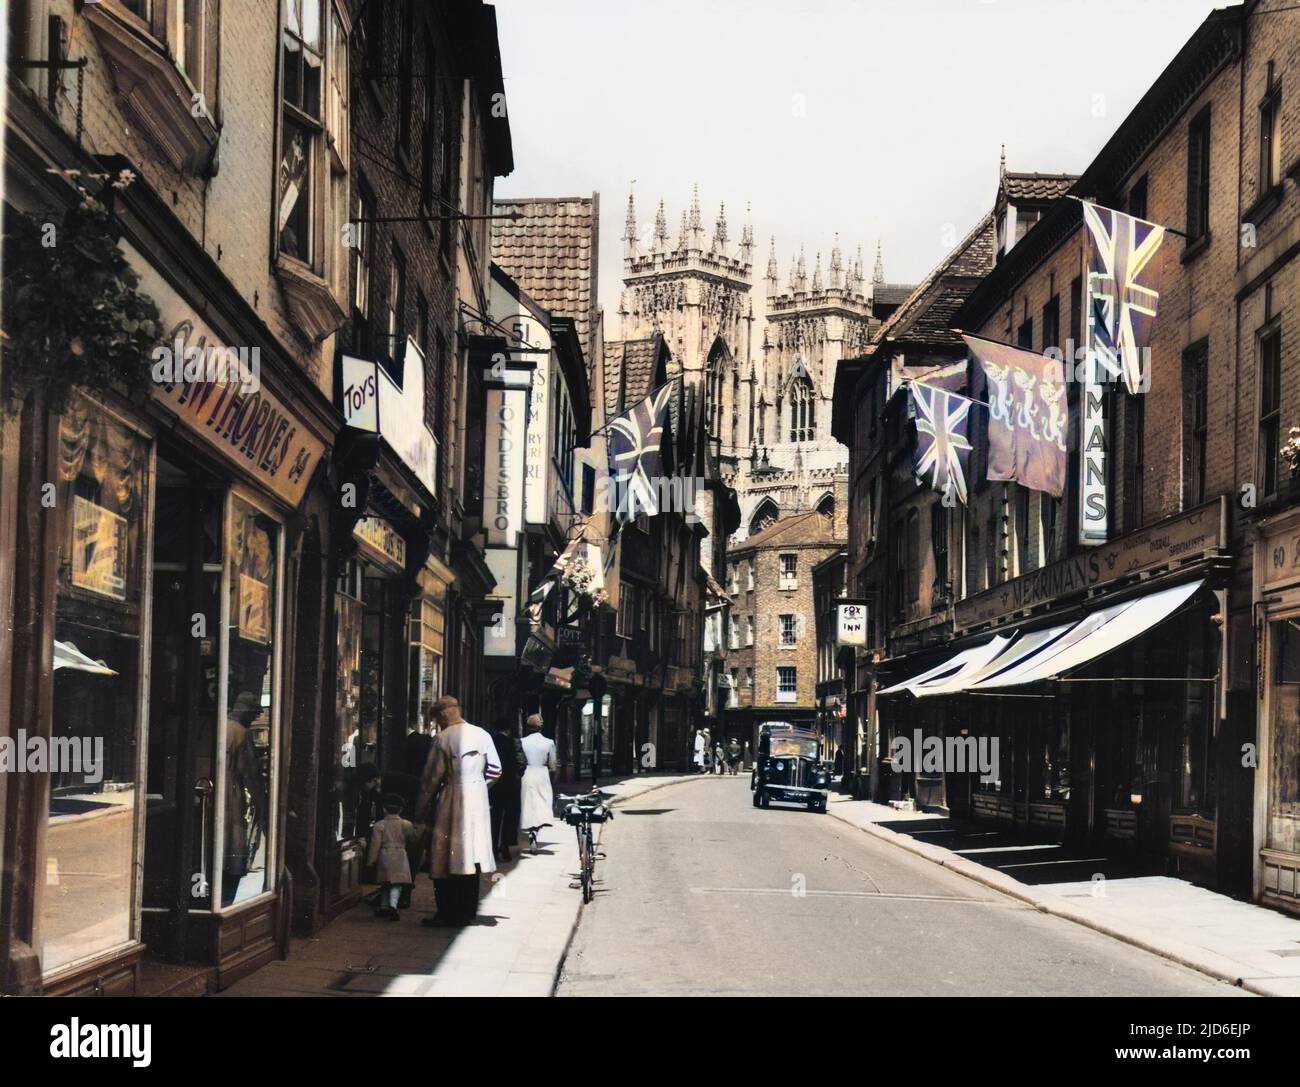 A view of Petergate, York, during festival time, with the towers of the Minster in the background. Colourised version of : 10154566       Date: 1950s Stock Photo